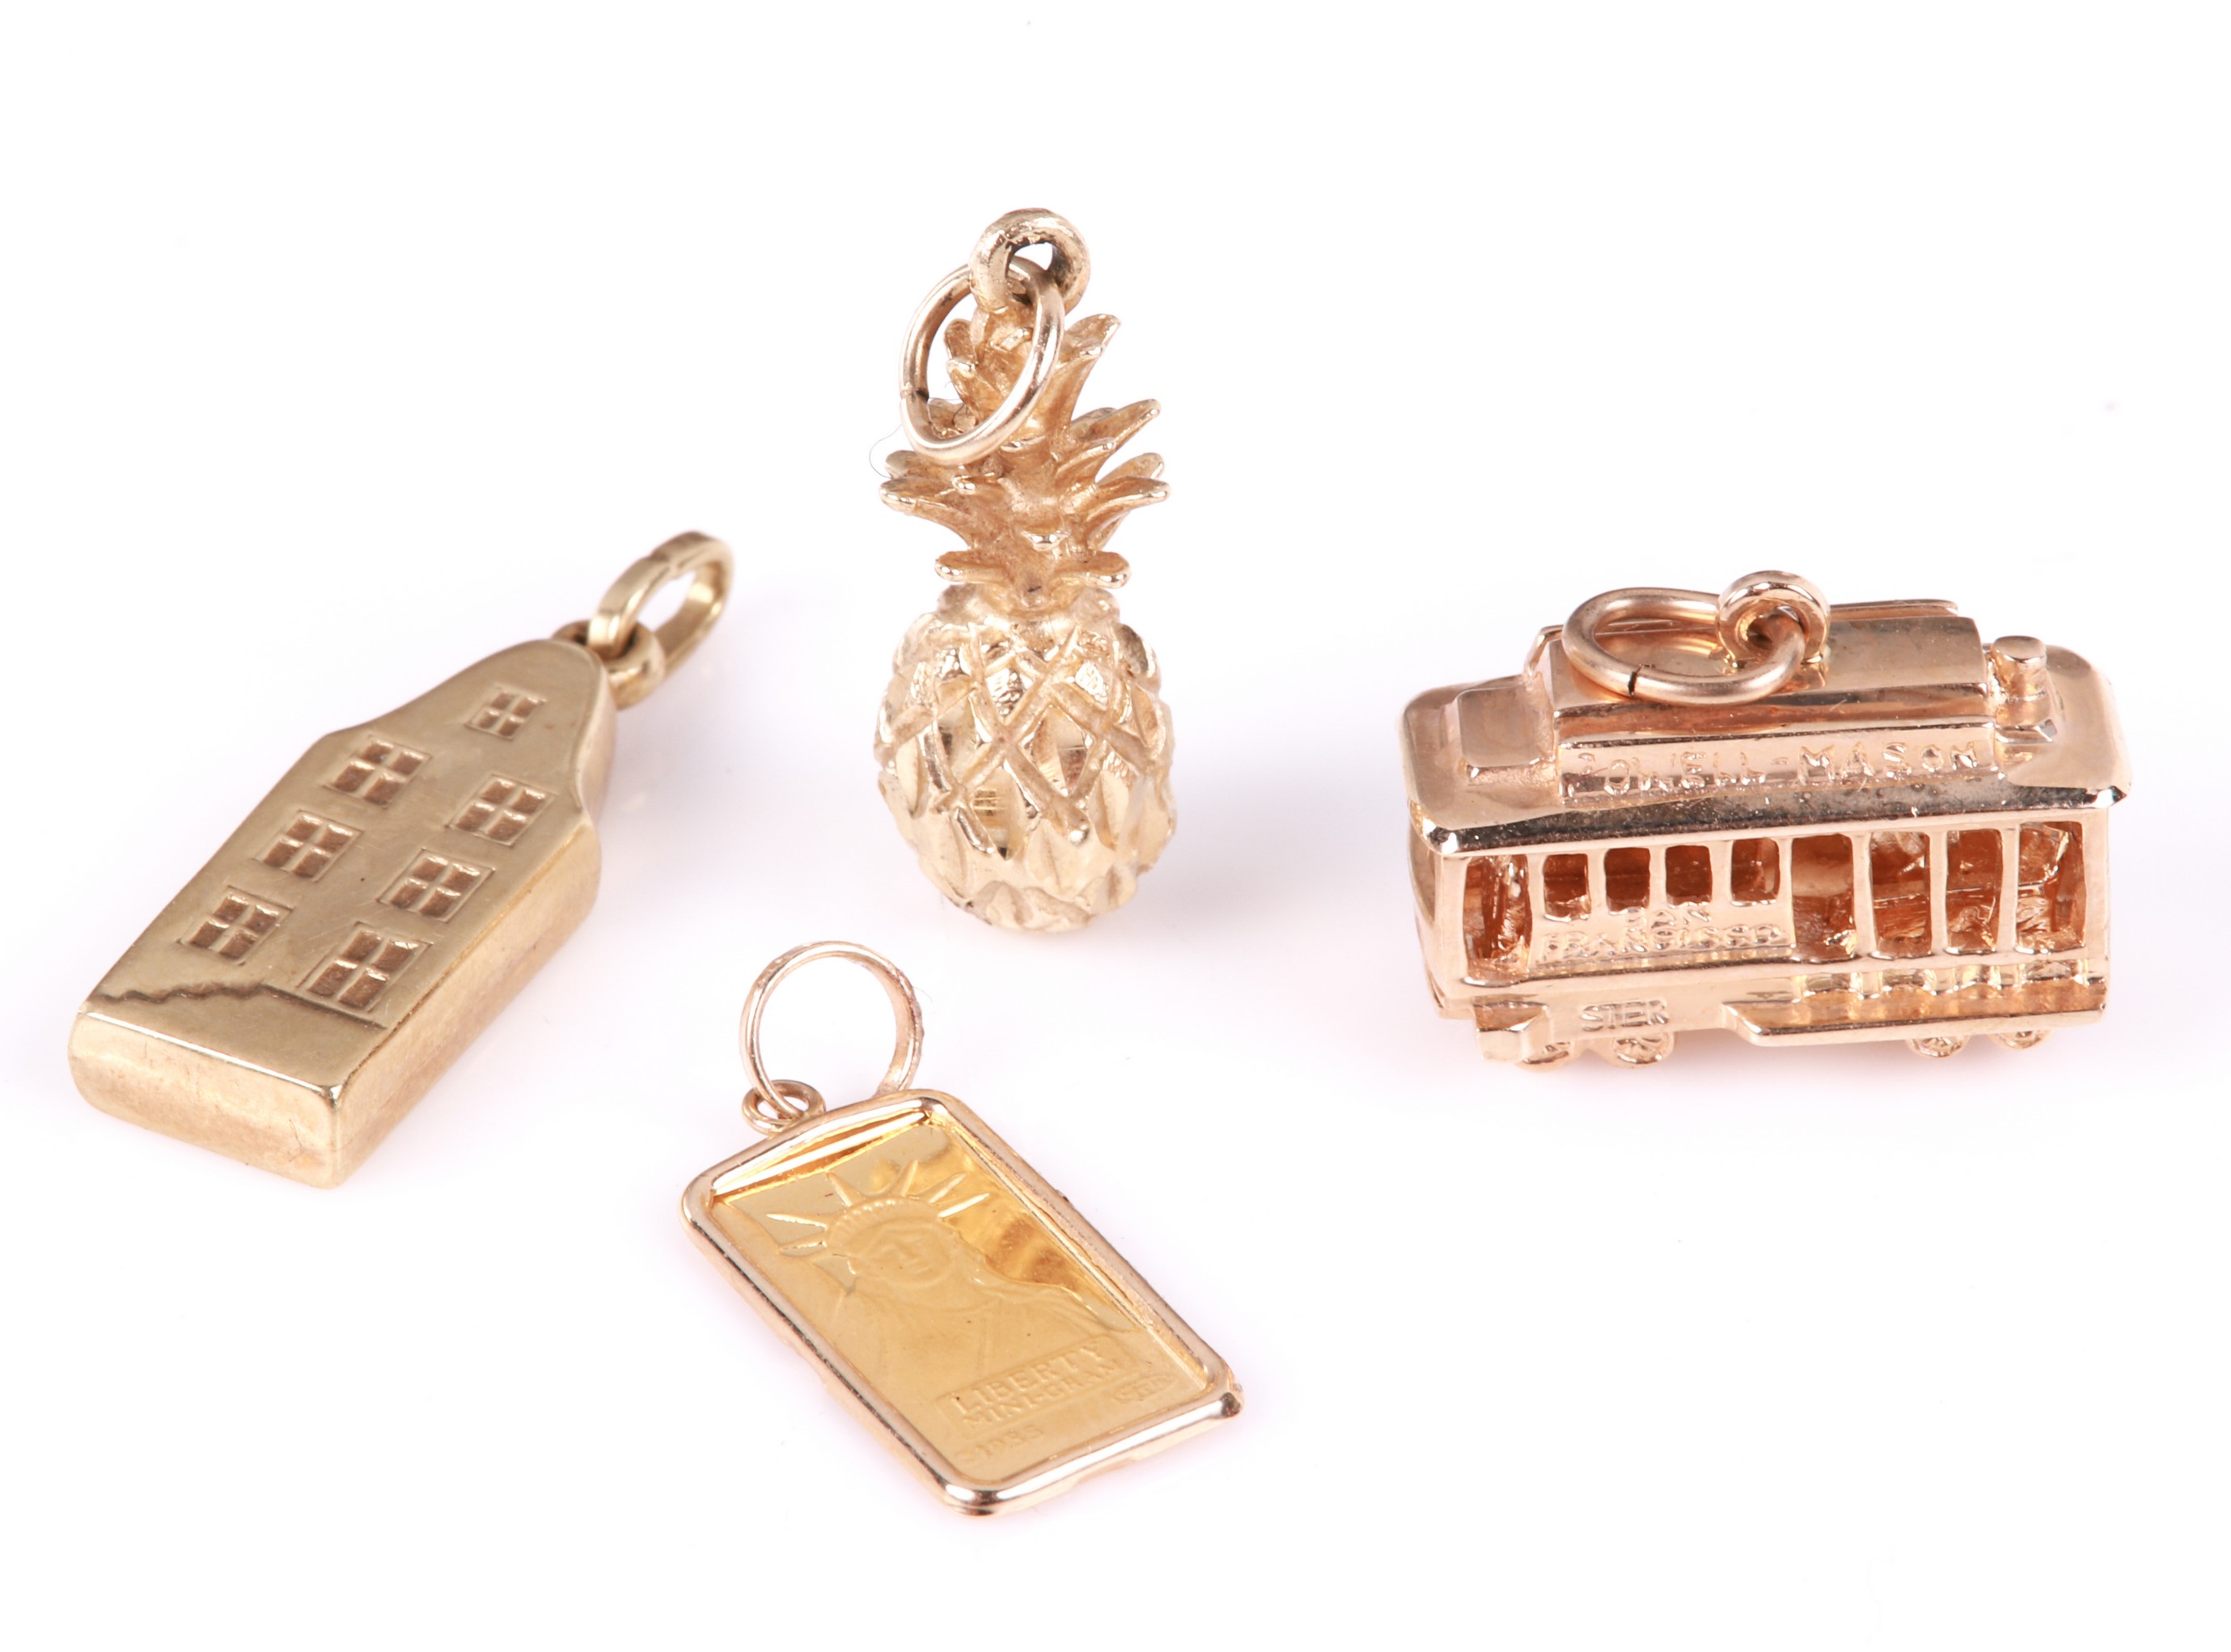  4 Yellow gold charms to include 3b5b5b